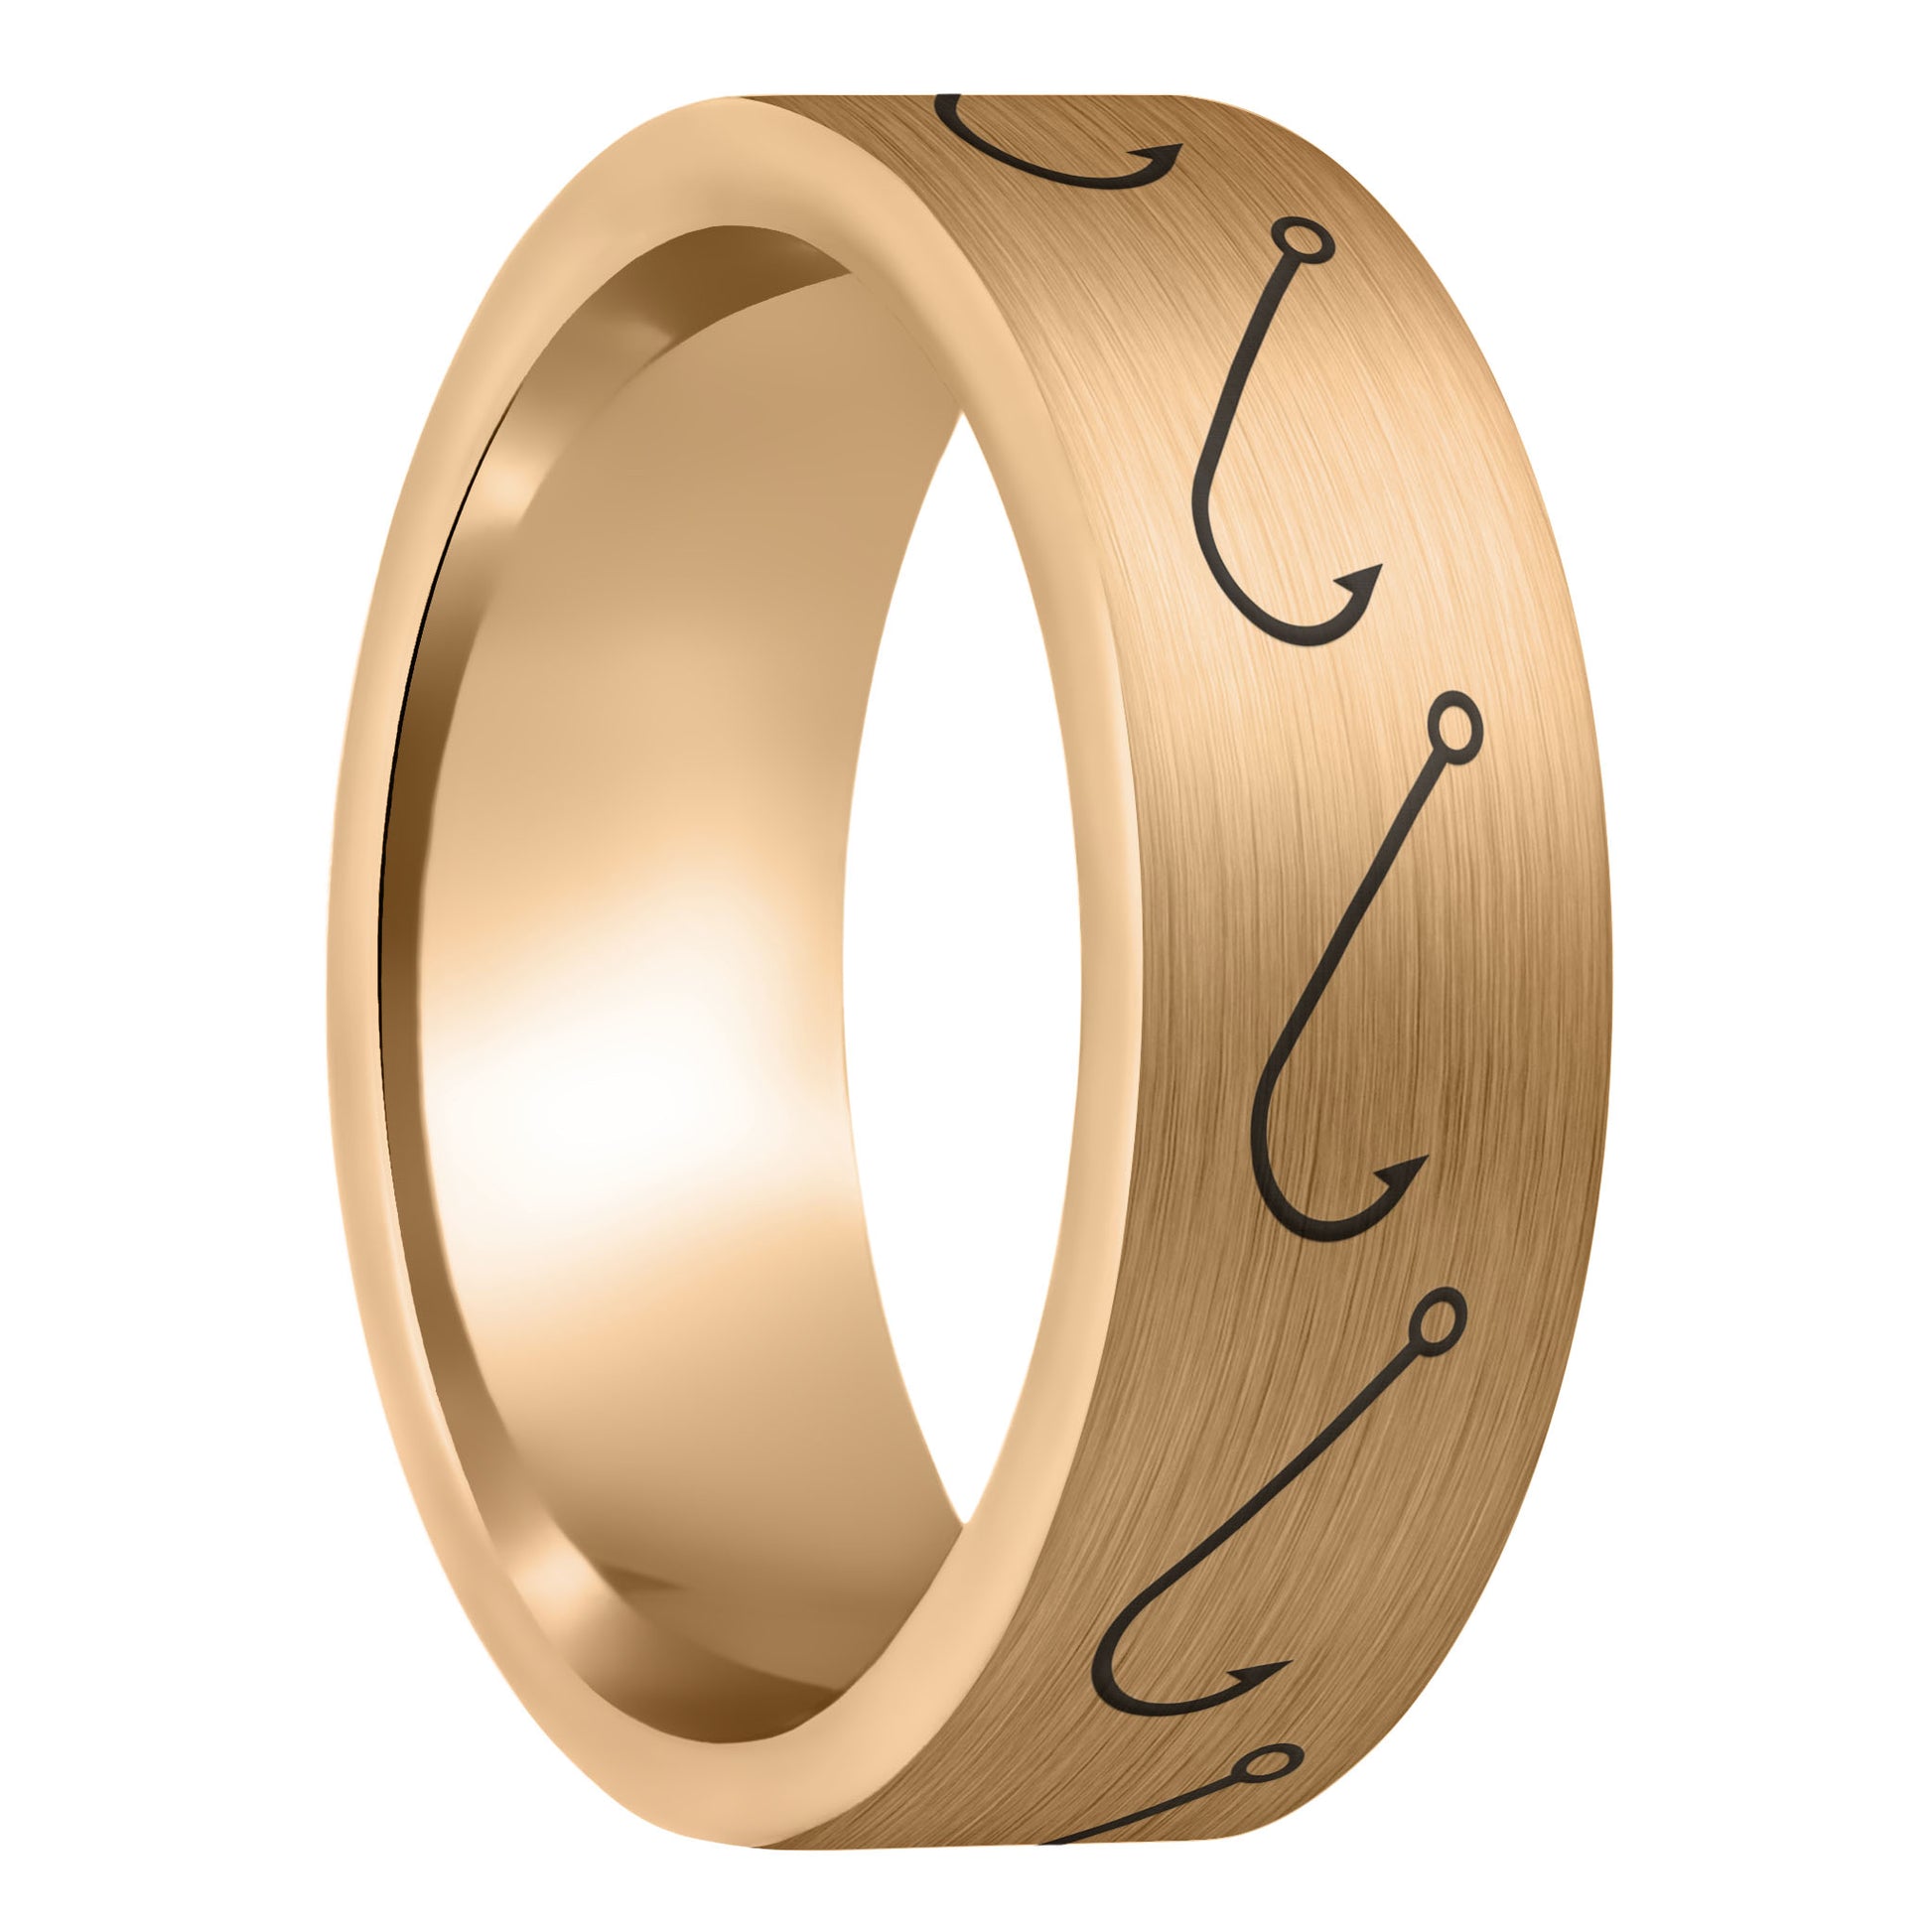 A simple fishing hook brushed rose gold tungsten men's wedding band displayed on a plain white background.